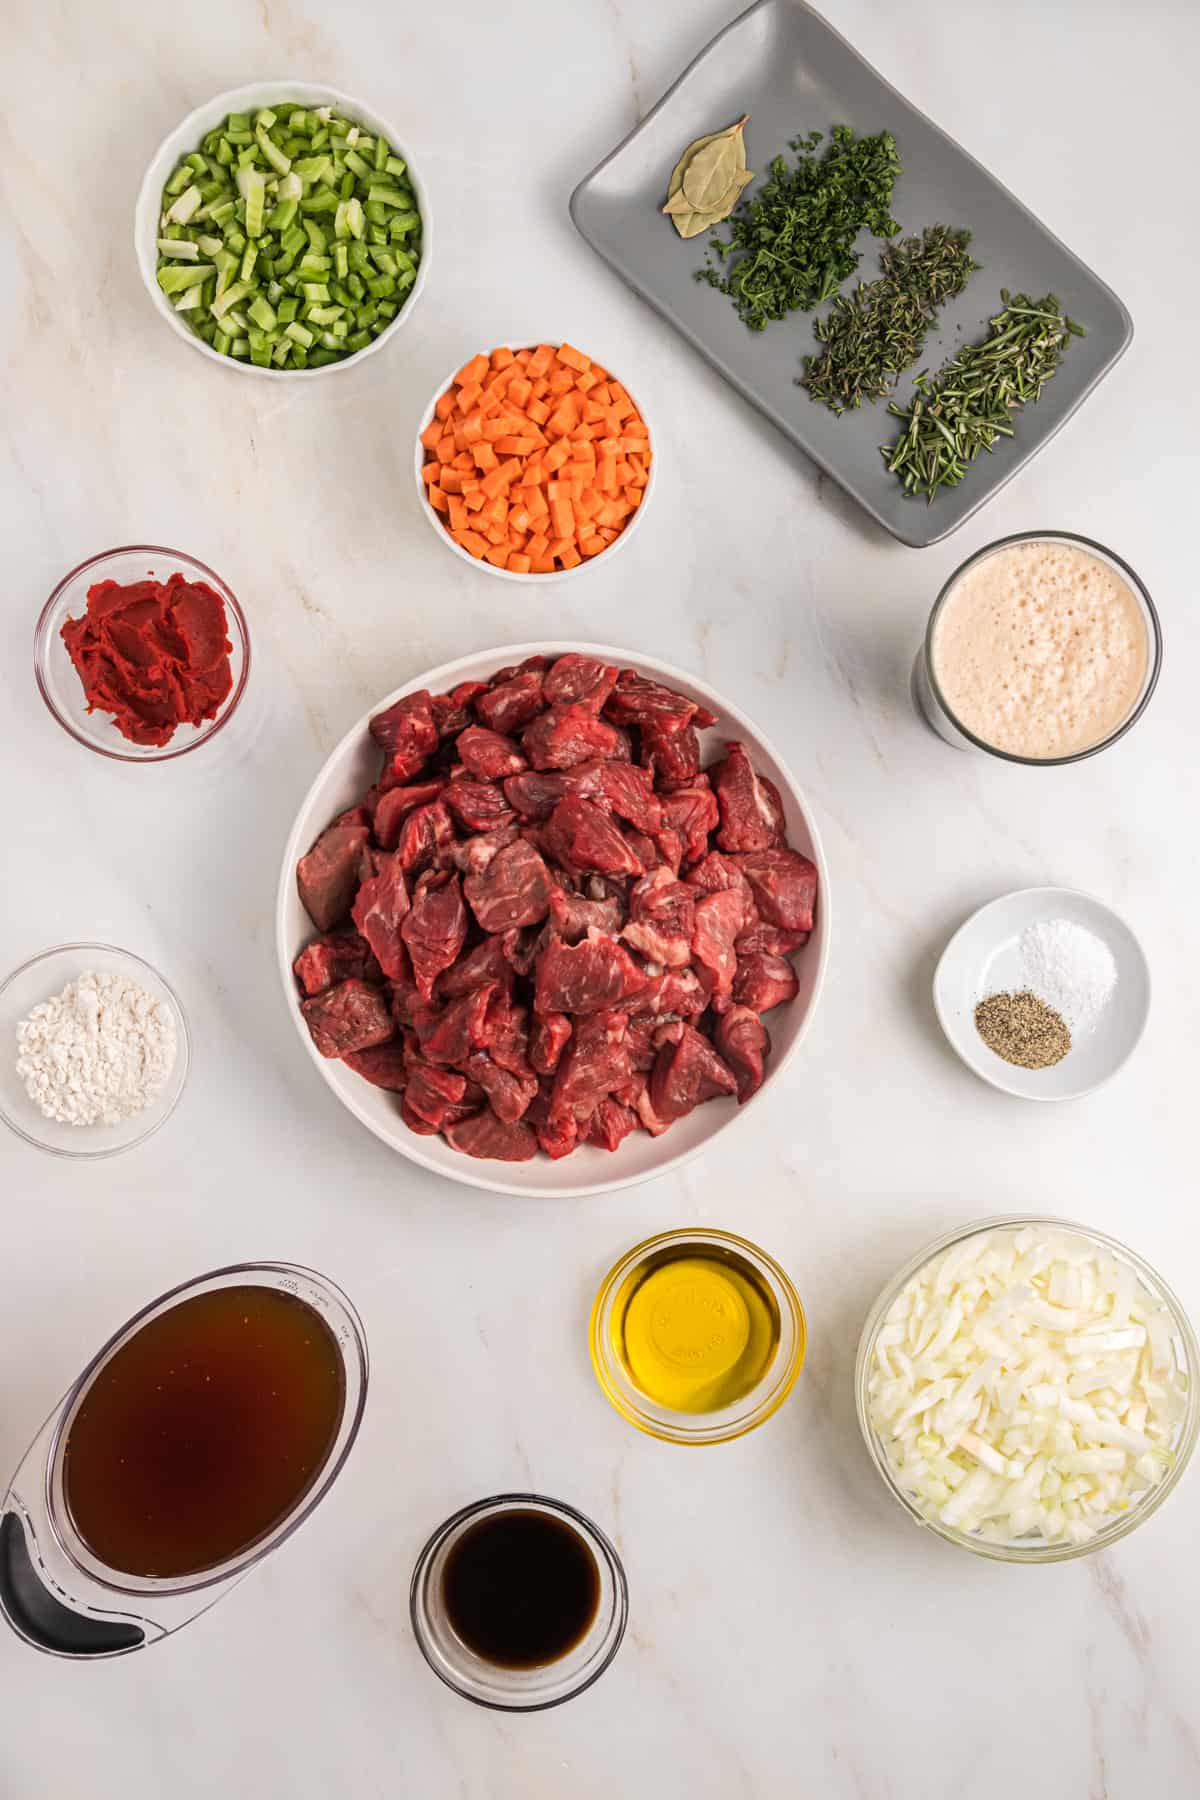 The ingredients for guinness beef stew are placed on a white surface.